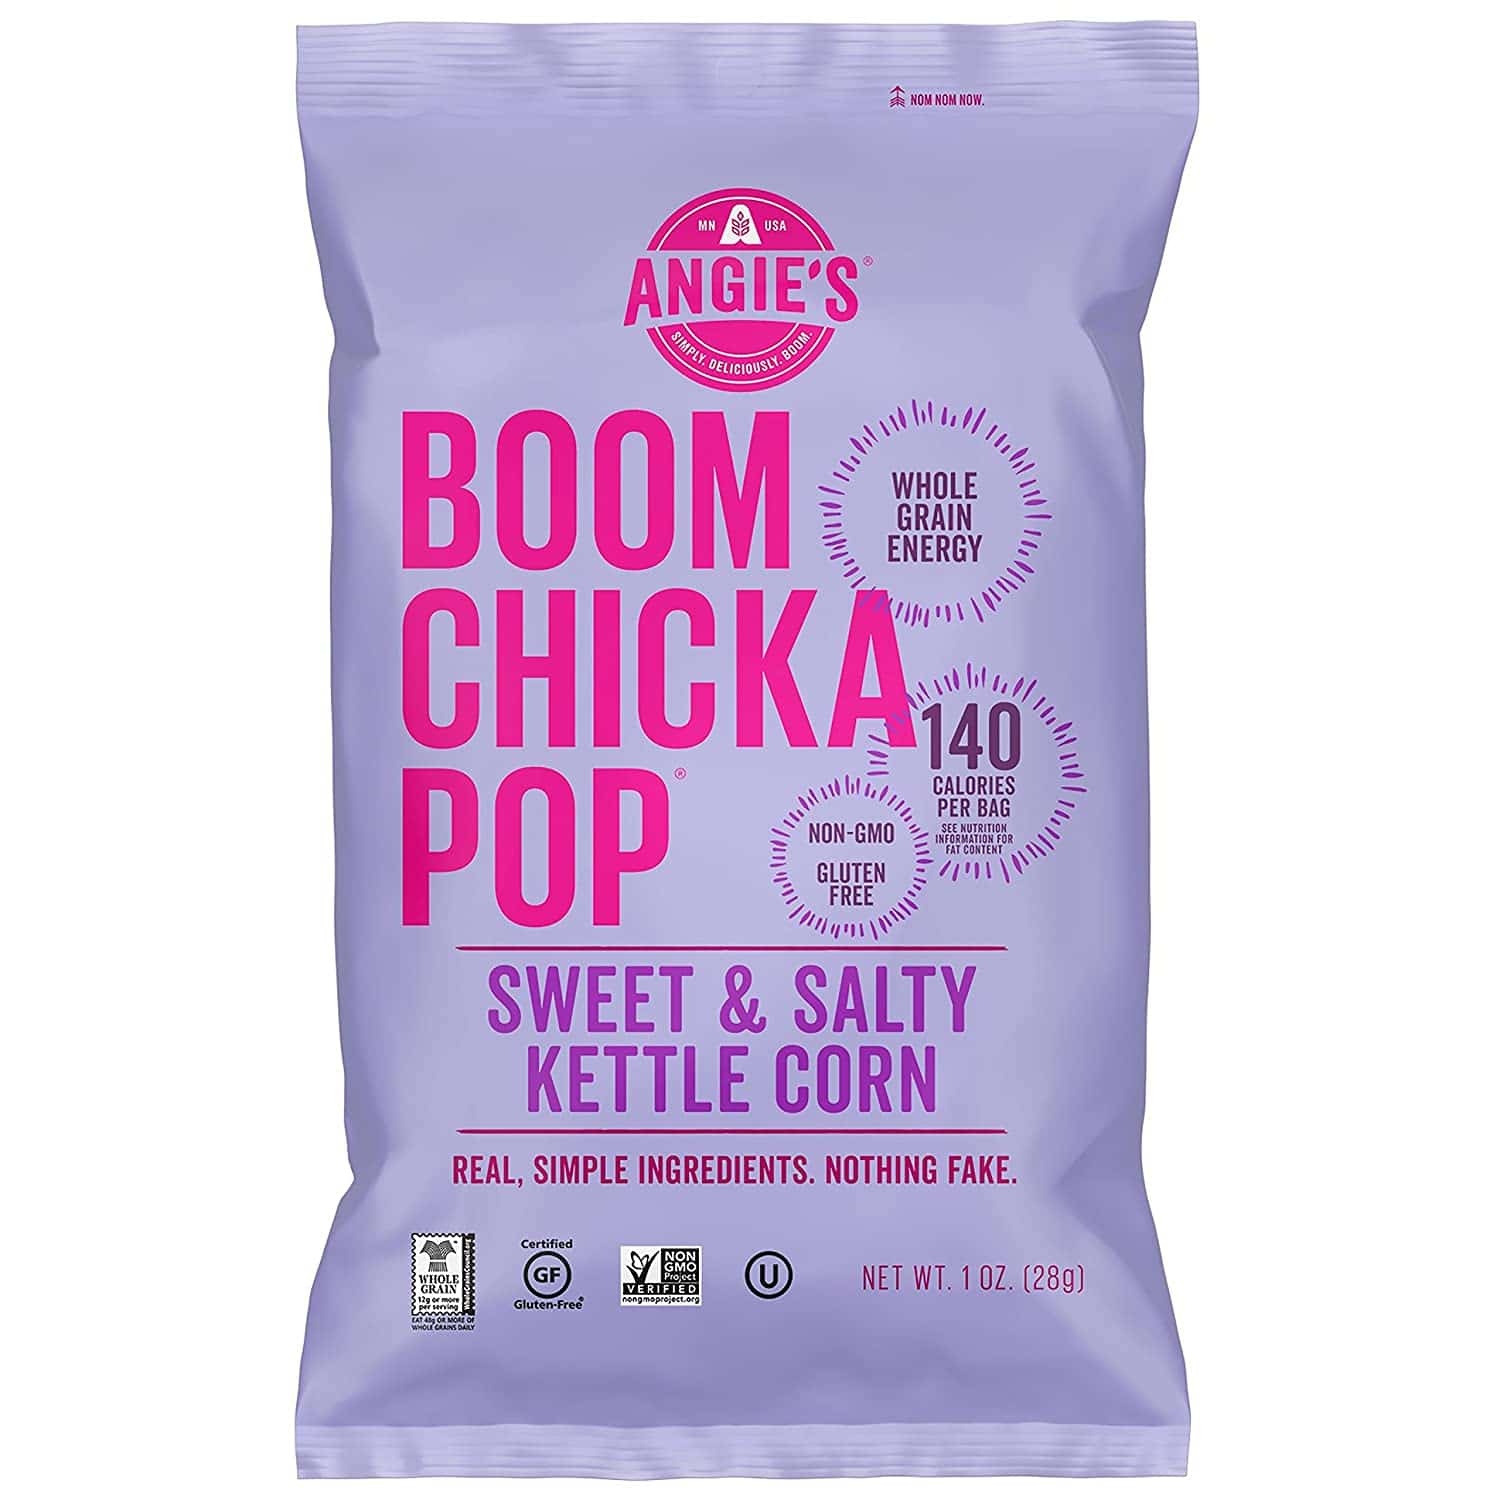 Angie's BOOMCHICKAPOP Gluten-Free Sweet and Salty Kettle Corn Popcorn vegan snack review